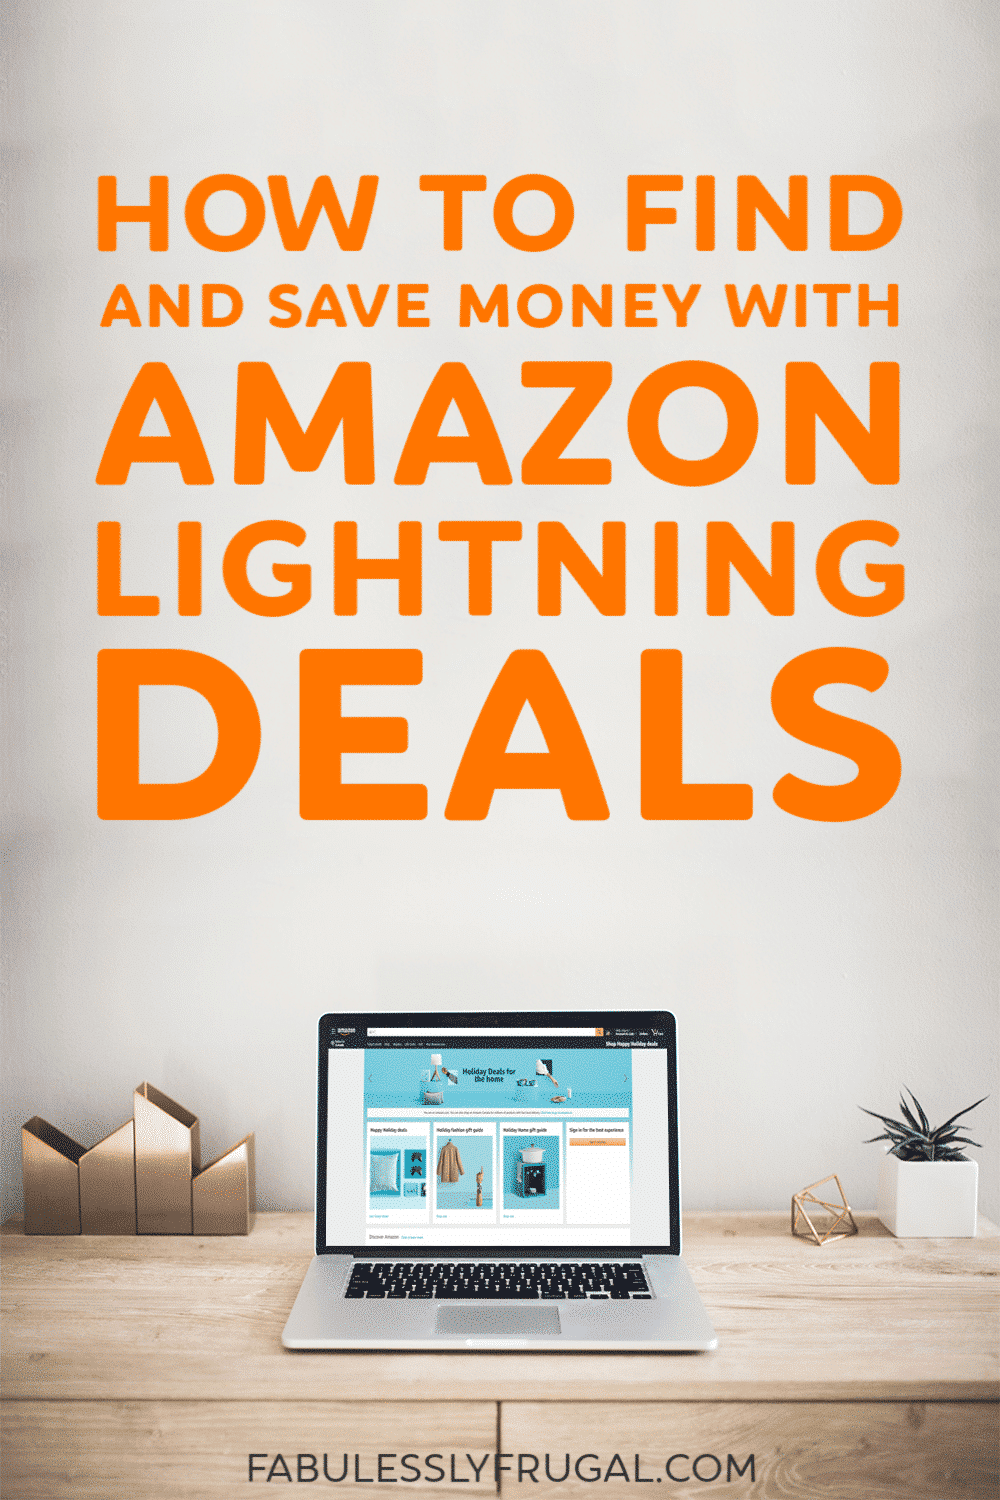 Lightning Deals: Everything Sellers Need to Know